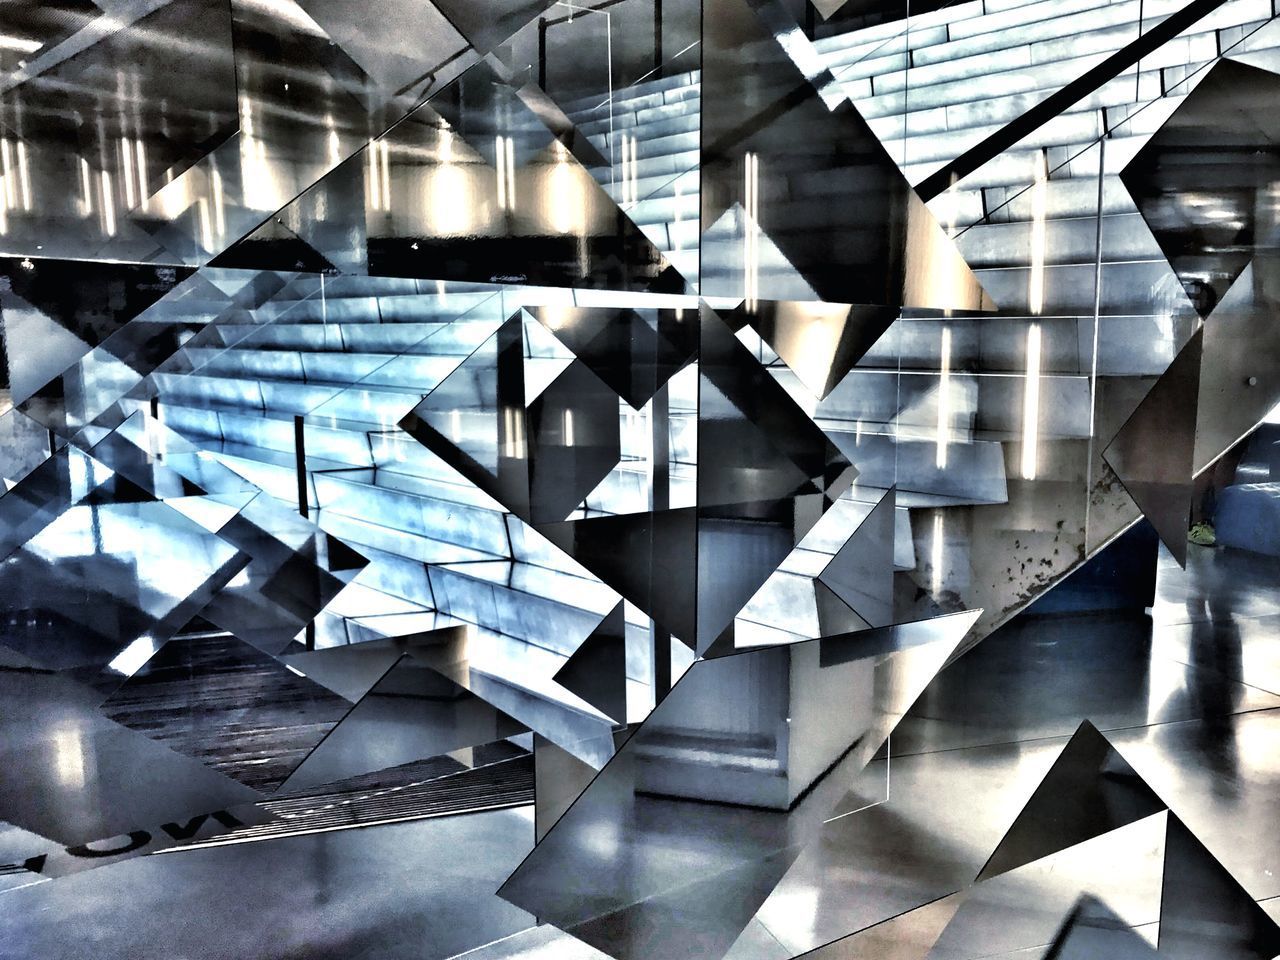 FULL FRAME SHOT OF GLASS WALL WITH ABSTRACT PATTERN